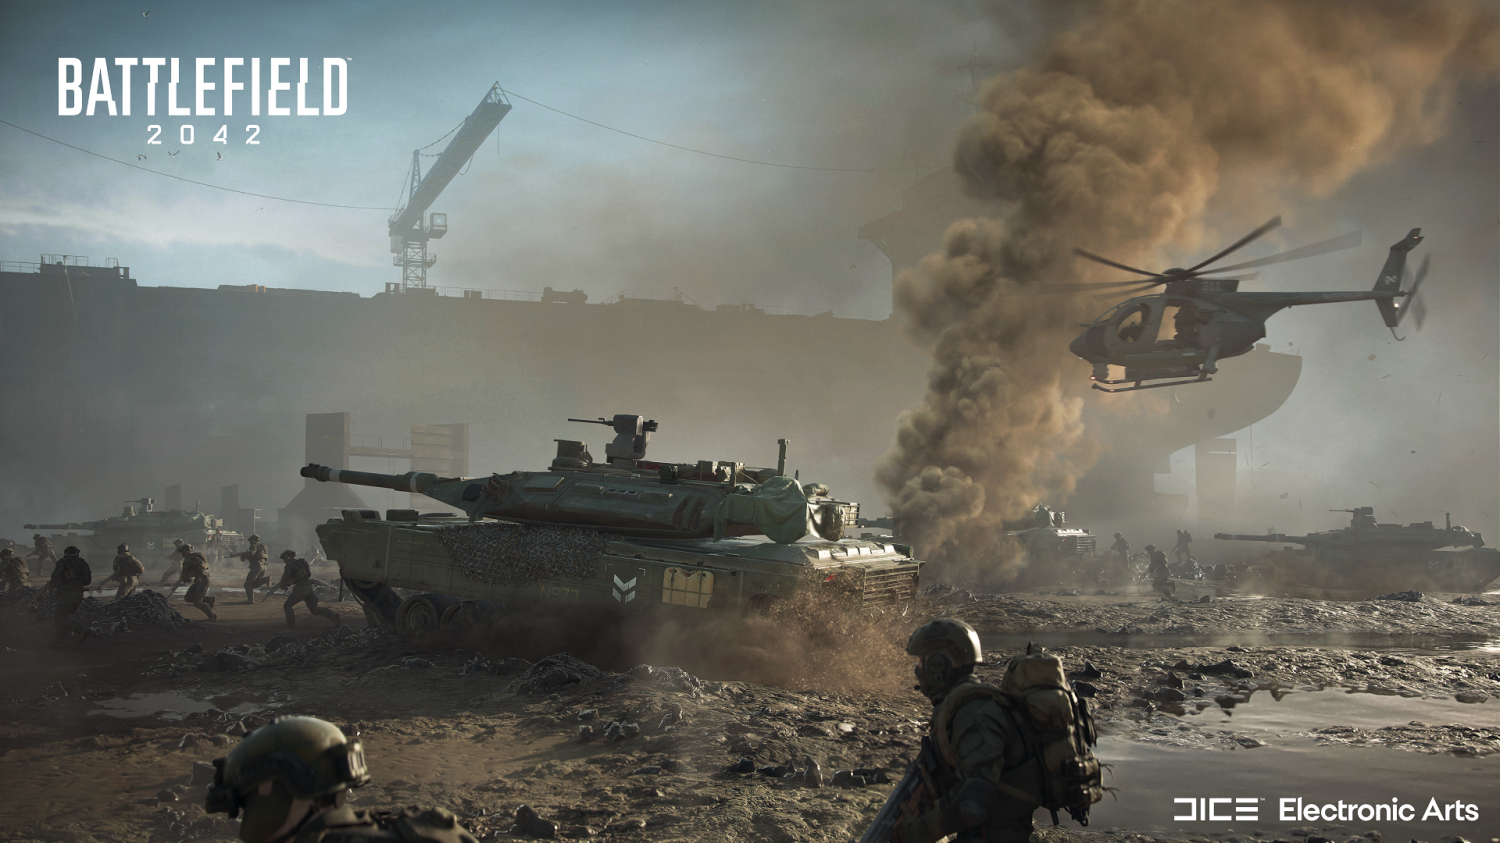 Battlefield 2042 rumored Battle Royale mode is a waste of everyone's time